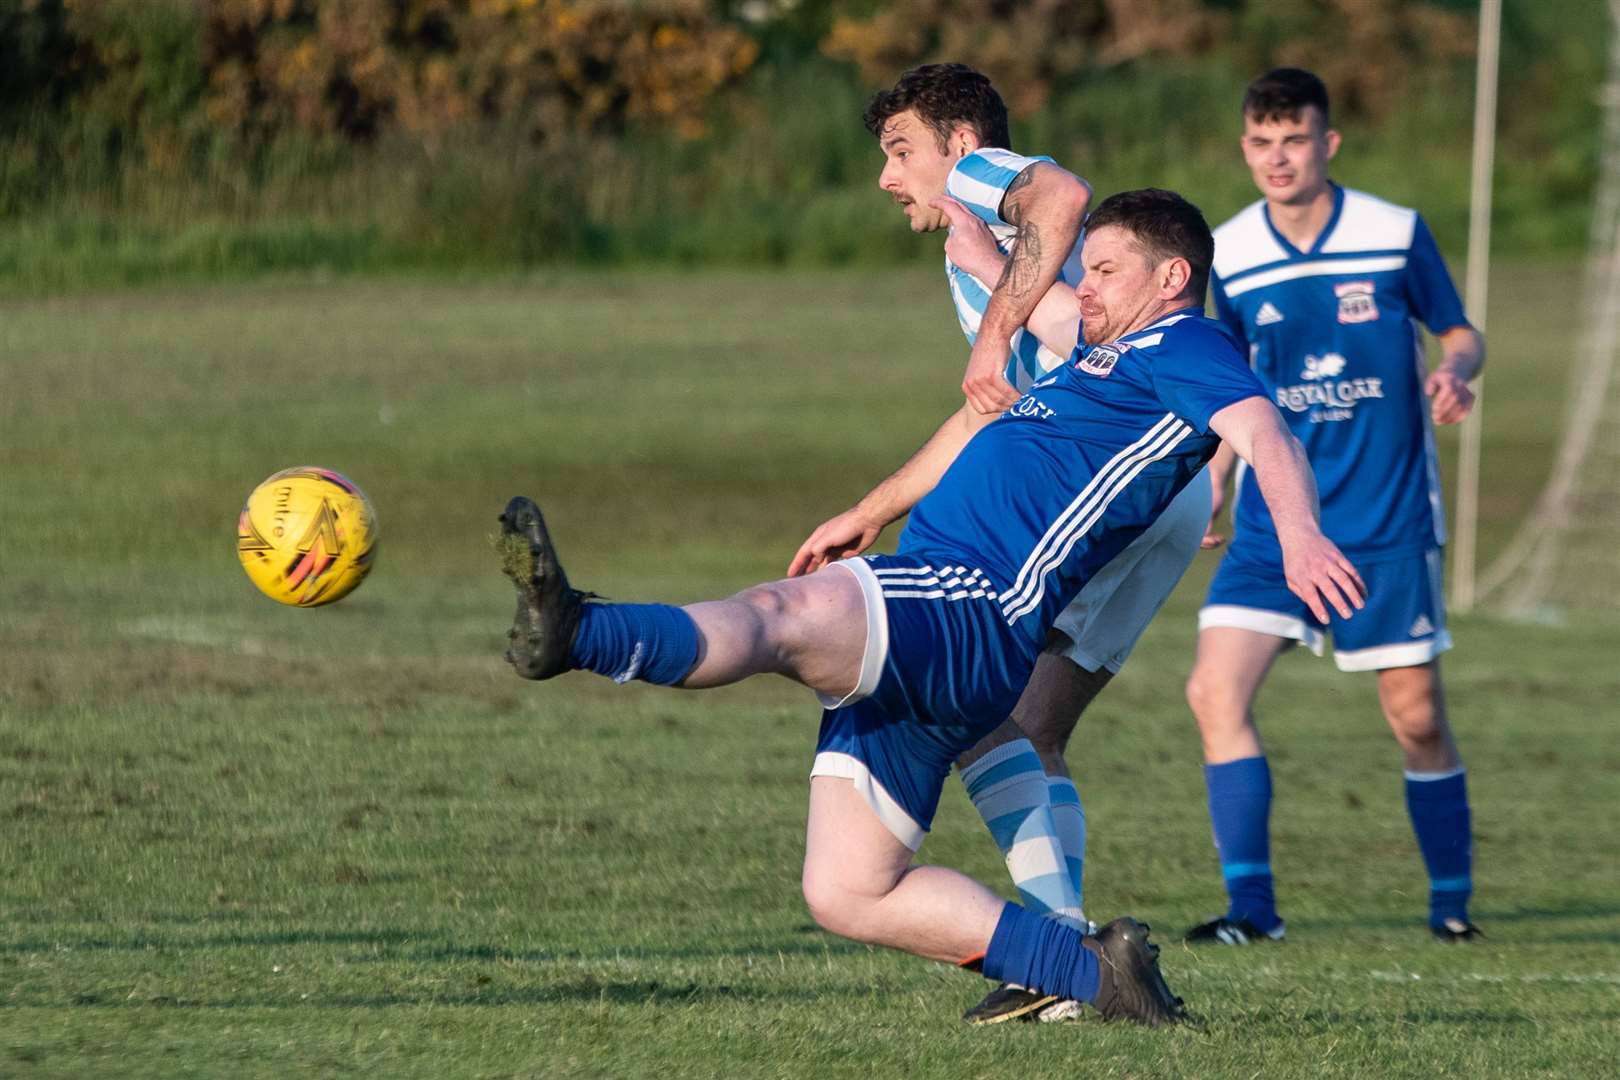 Cullen's Scott Mair is at full stretch to win the ball away from RAF Lossiemouth's Reece Archer. Picture: Daniel Forsyth